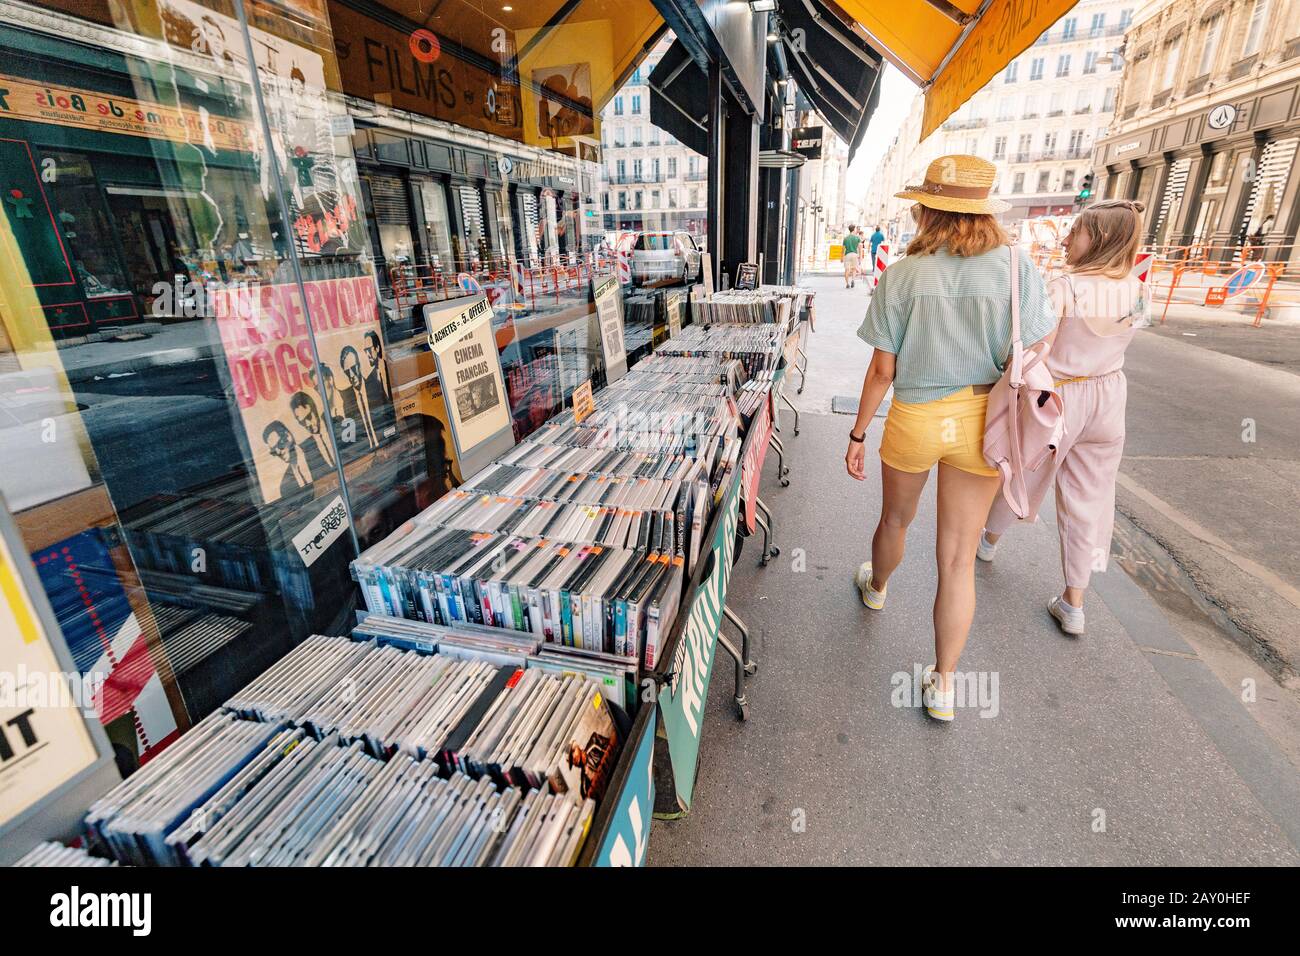 23 July 2019, Lyon, France: Old dvd movies for sale at outdoor flea market at the city street Stock Photo